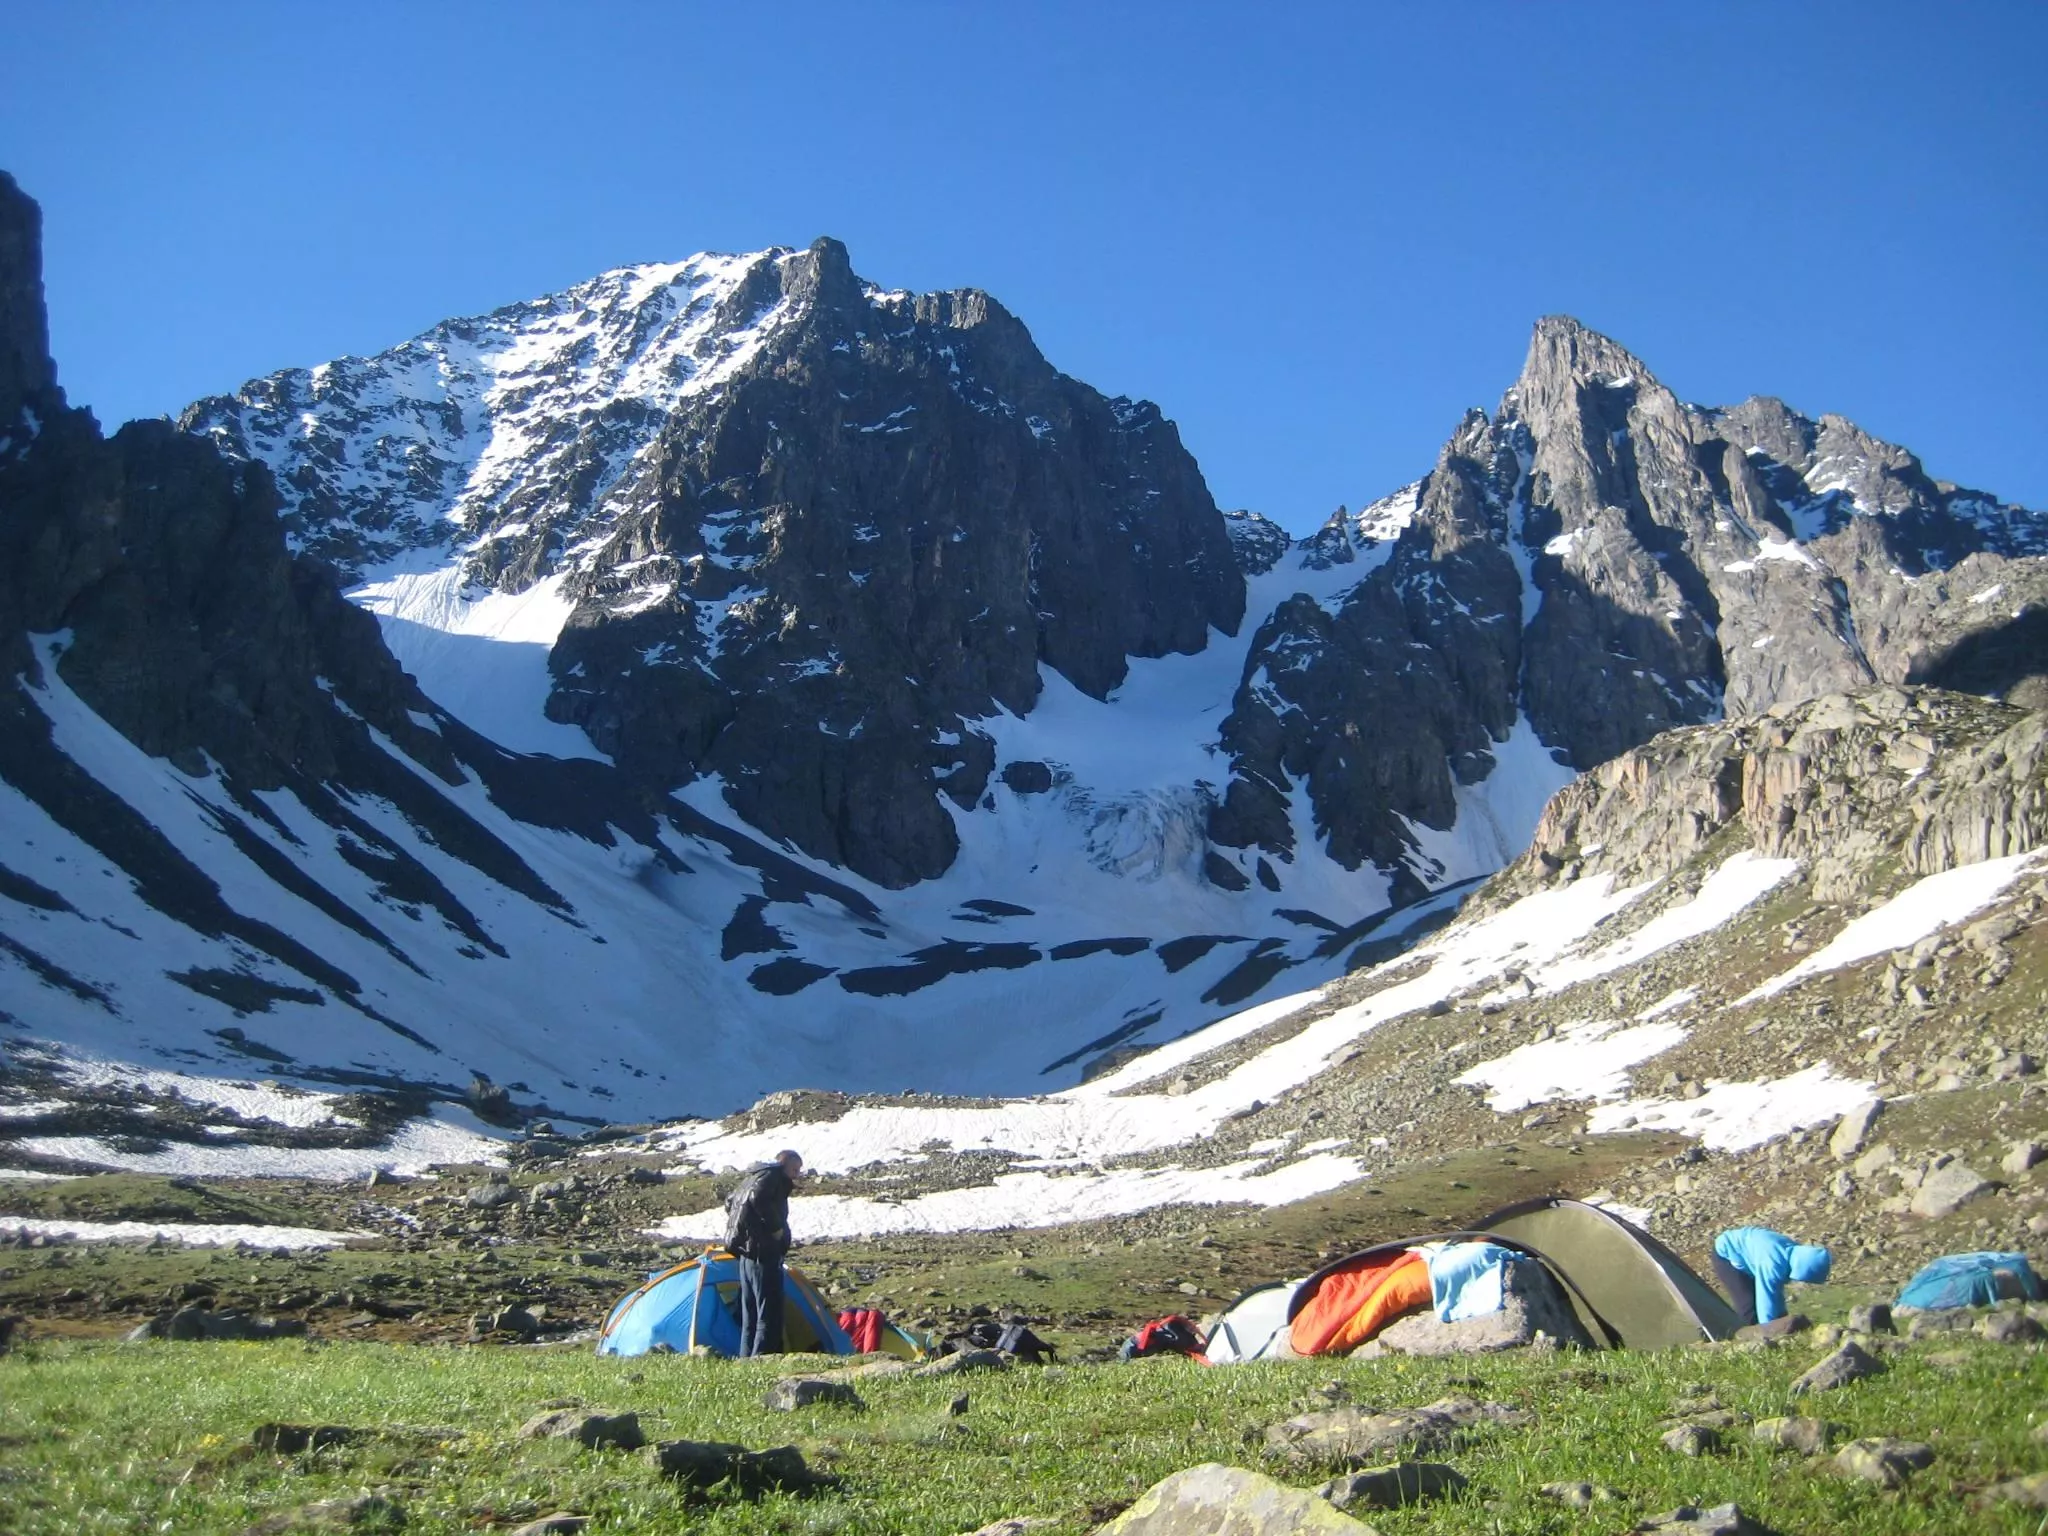 Kackar Mountains in Turkey, Central Asia | Mountains,Trekking & Hiking - Rated 3.8